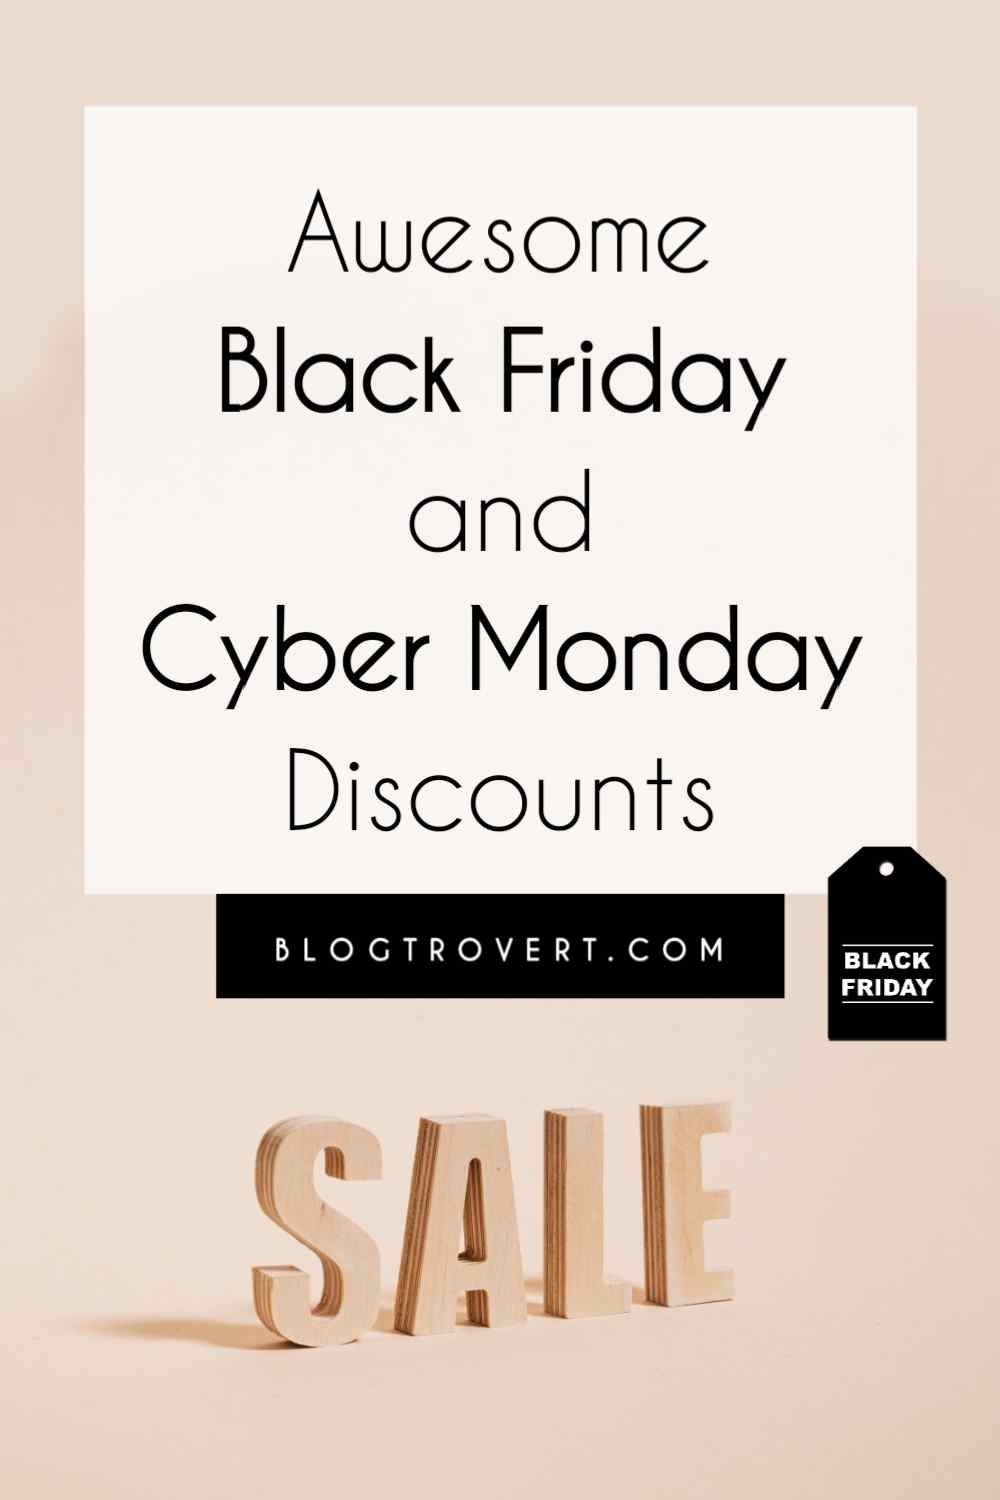 Awesome Black Friday and Cyber Monday Deals For Bloggers and Creatives 4